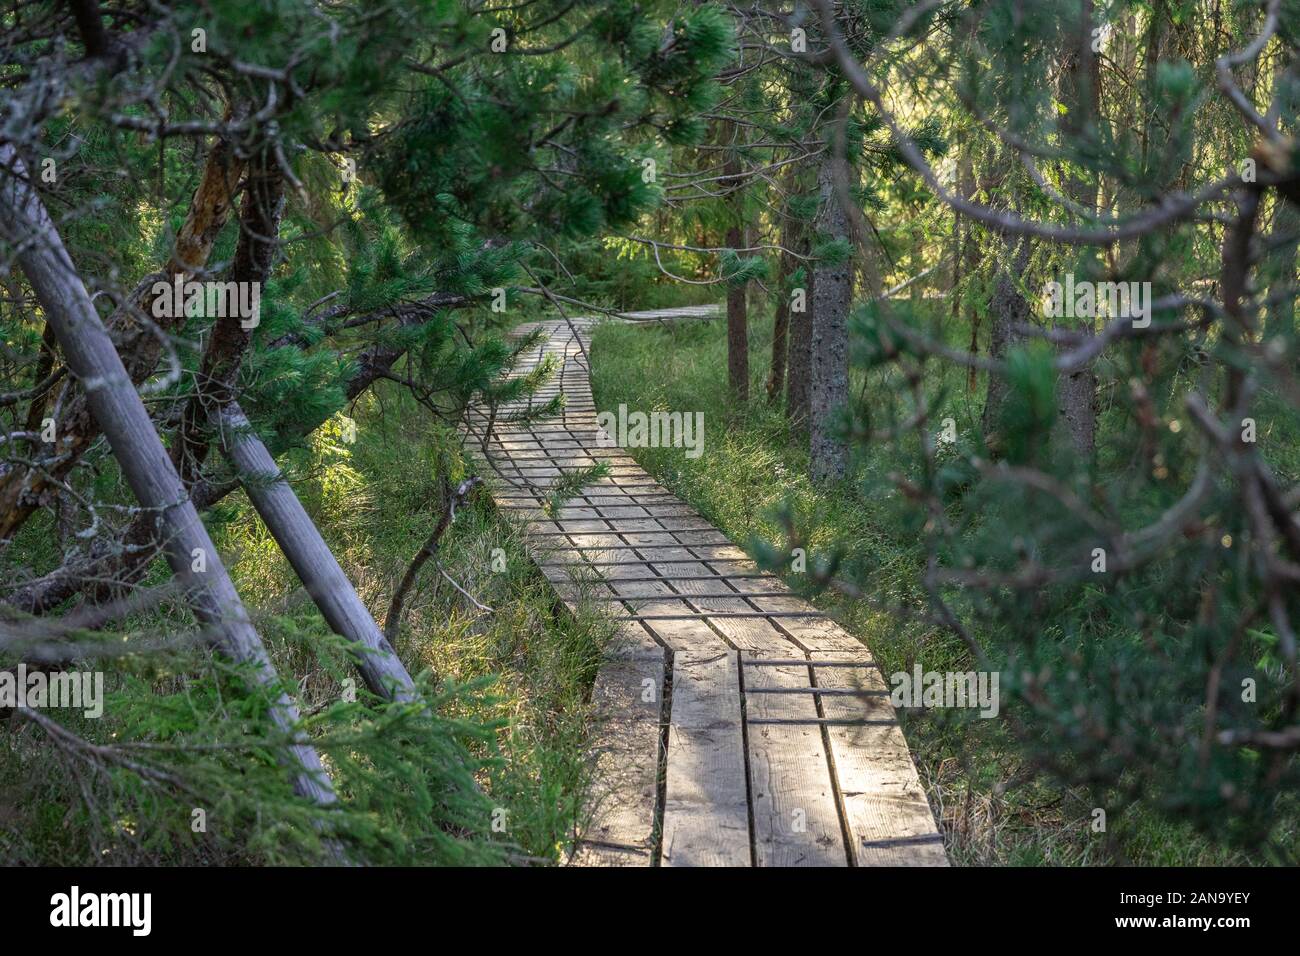 wooden path in the forest near a moor Stock Photo